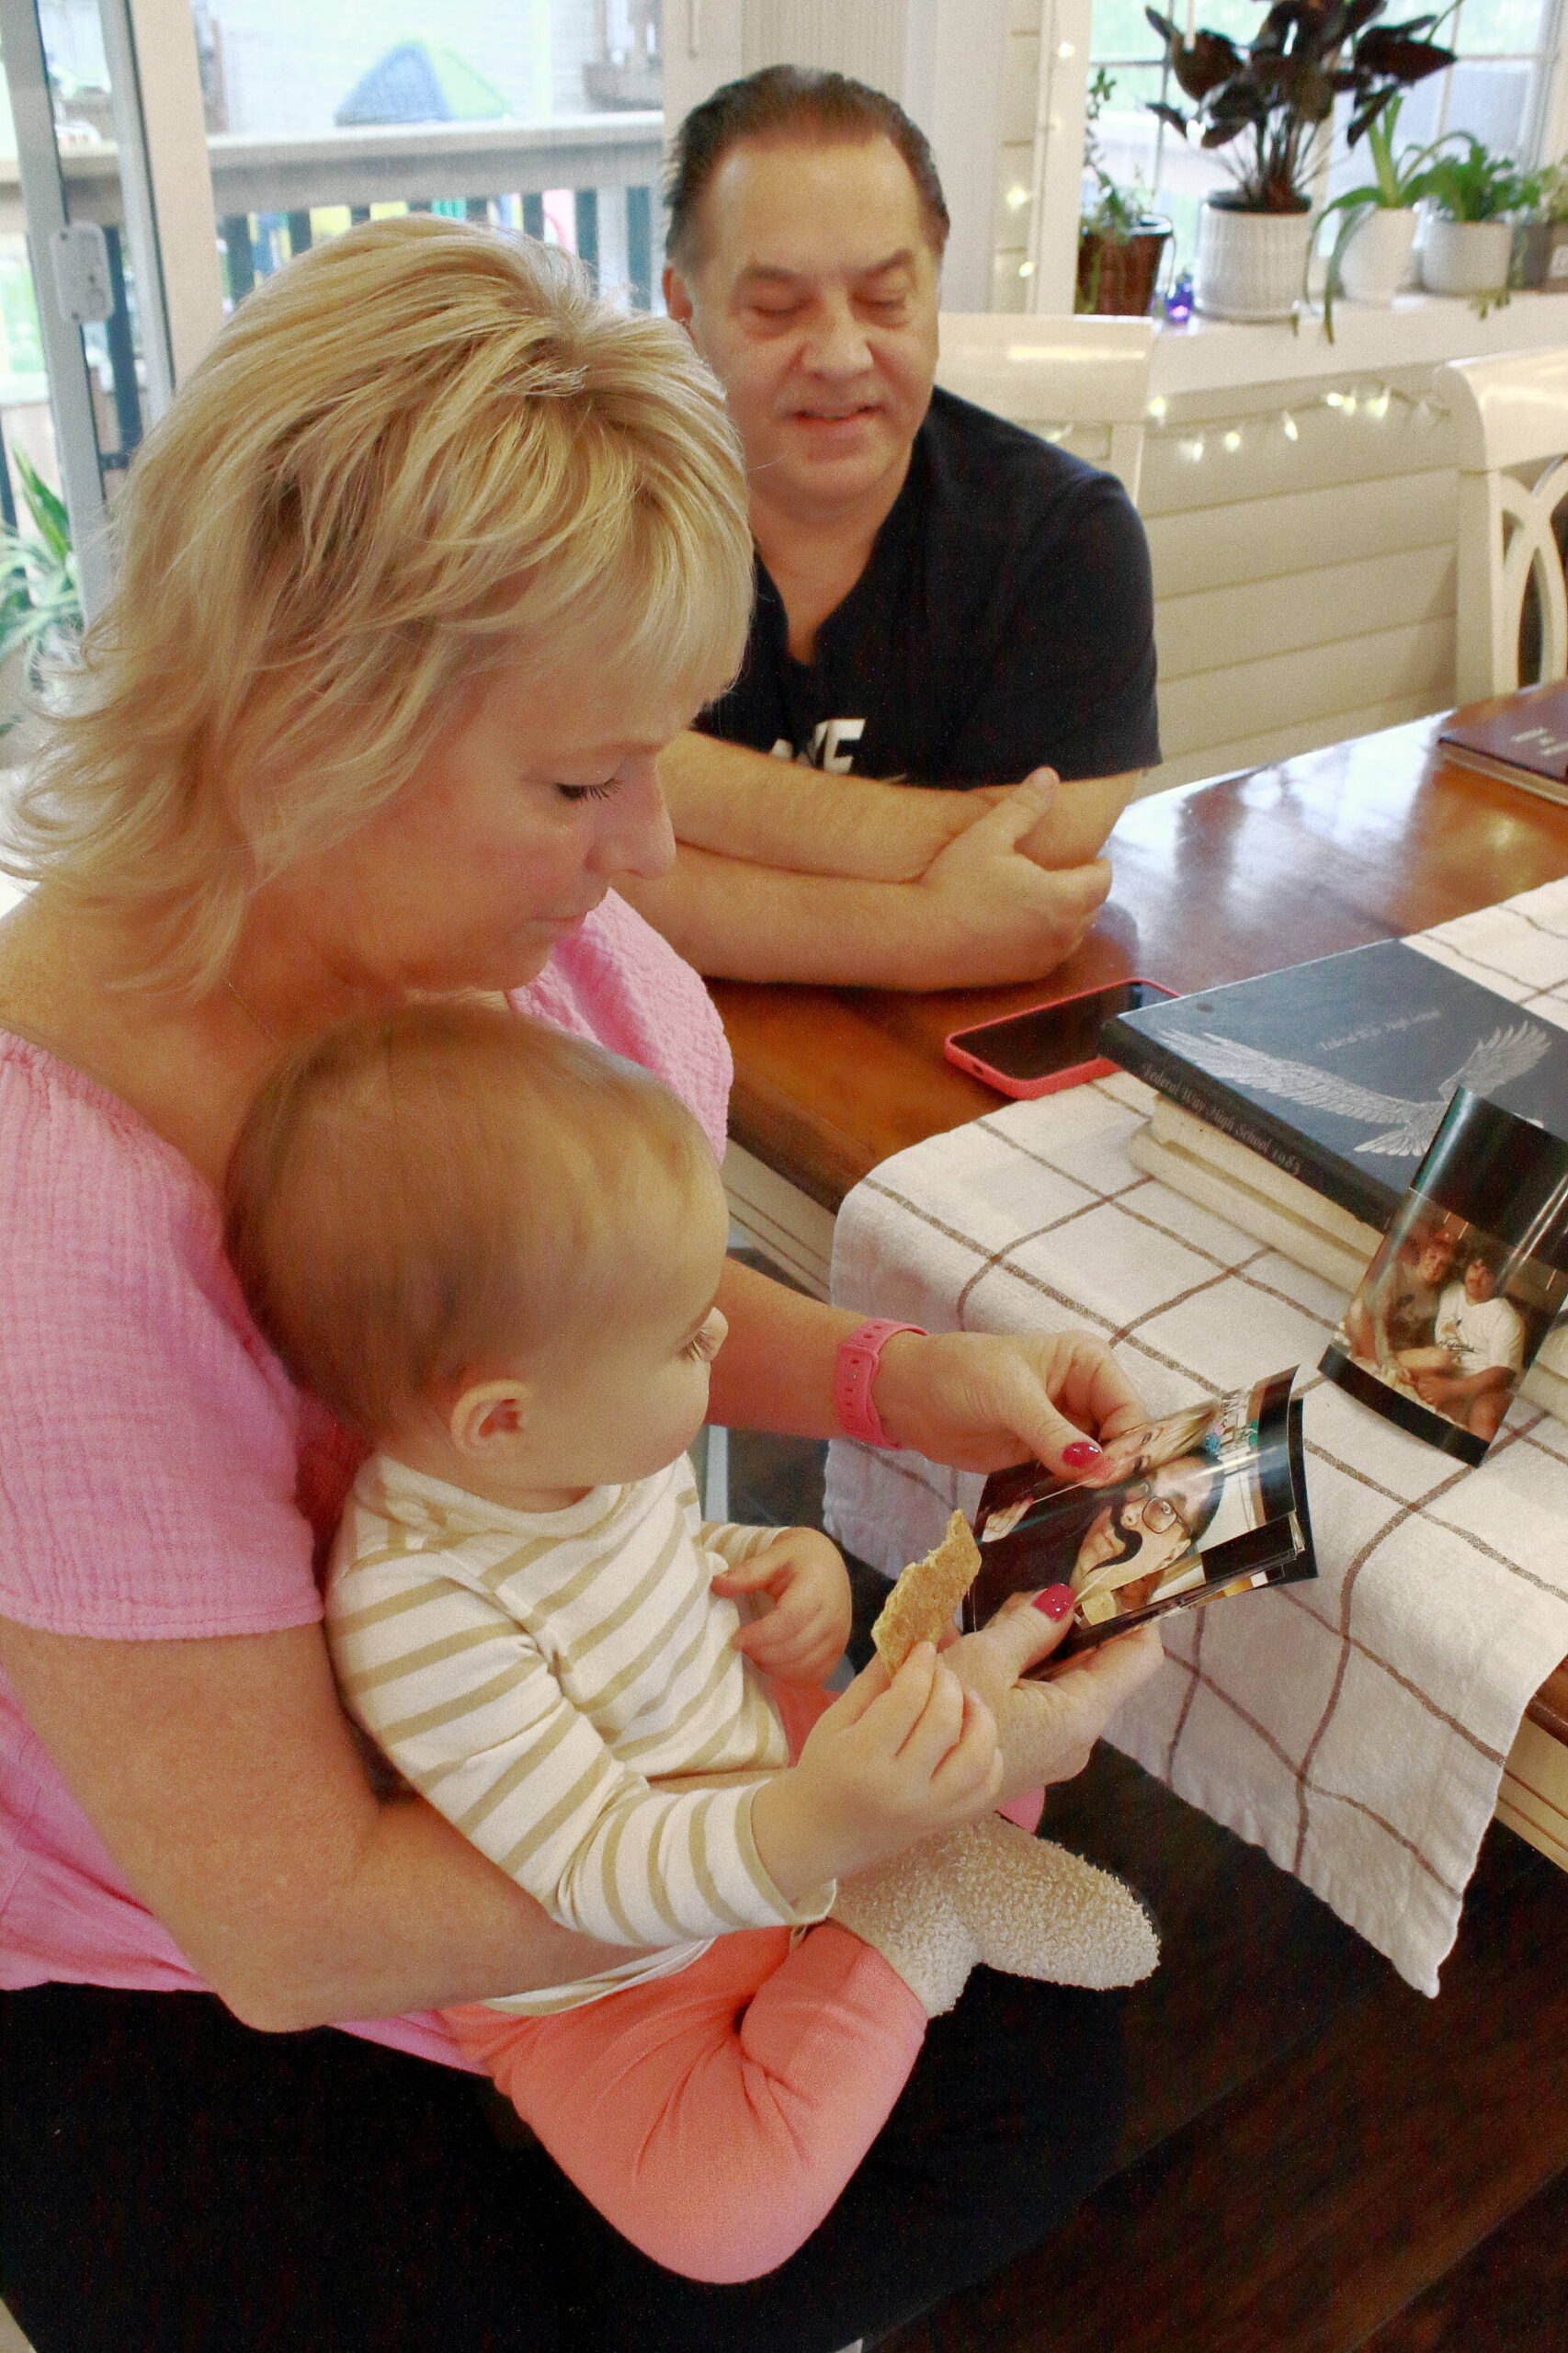 Dale and Denise with their first grandchild looking at family photos and reminiscing. Photo by Keelin Everly-Lang / The Mirror.